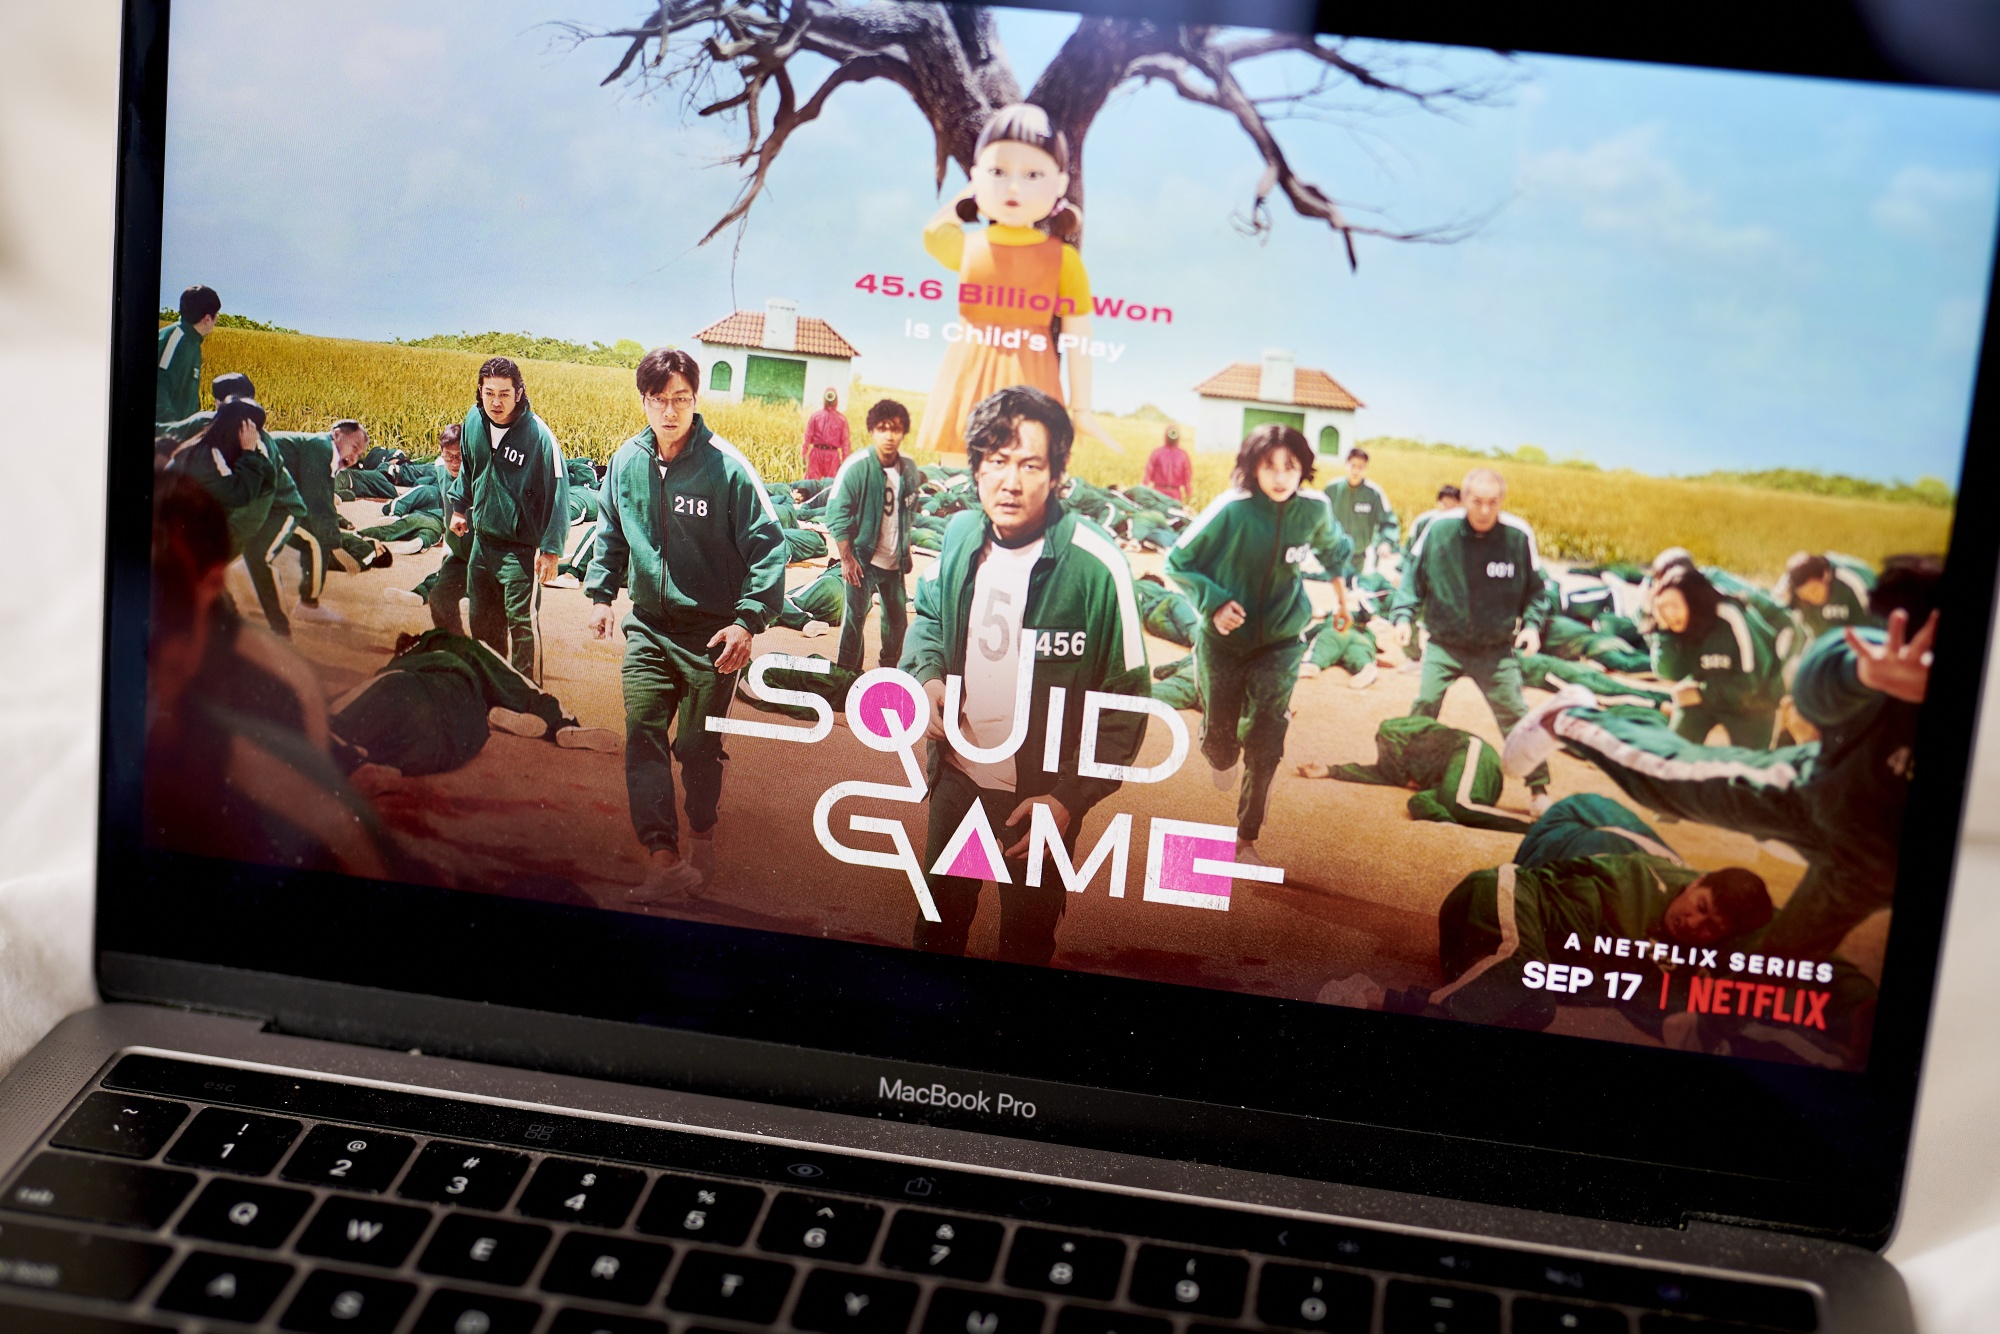 Squid Game Is Your Next Netflix Binge, And With Good Reason